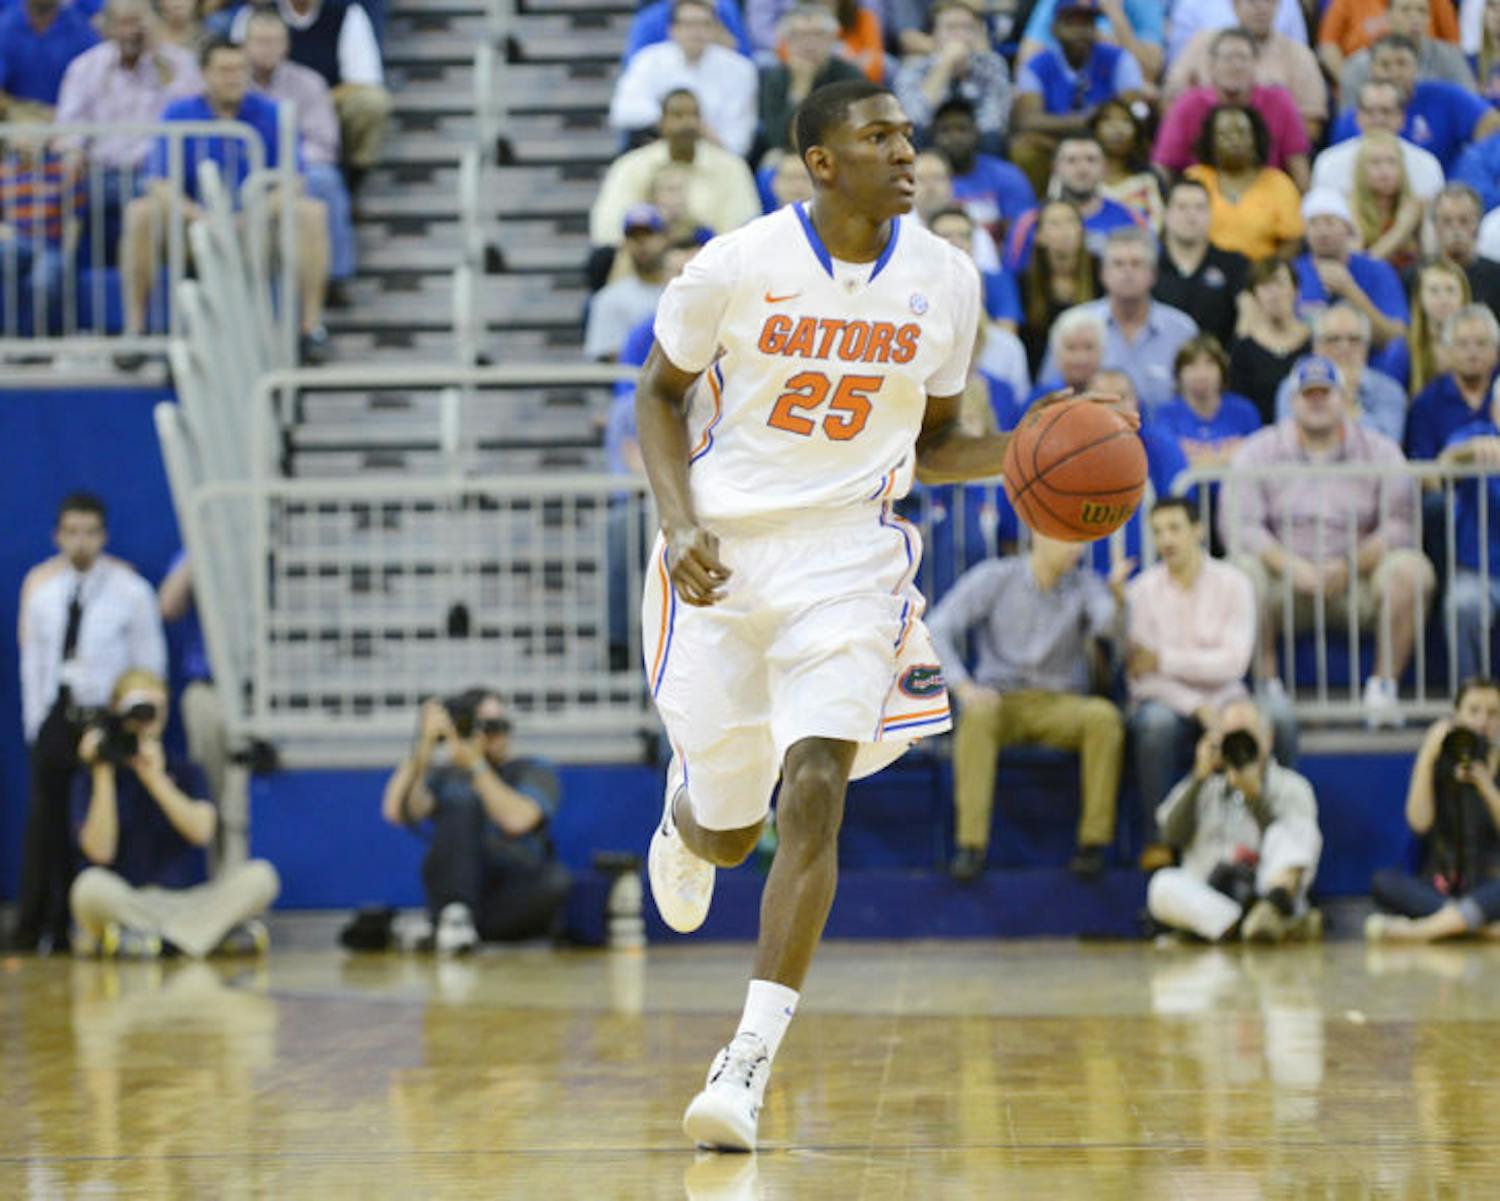 DeVon Walker drives down the court during Florida’s 71-66 win against Auburn on Feb. 19 in the O’Connell Center. Walker has hit 8 of his last 14 three-point shots.